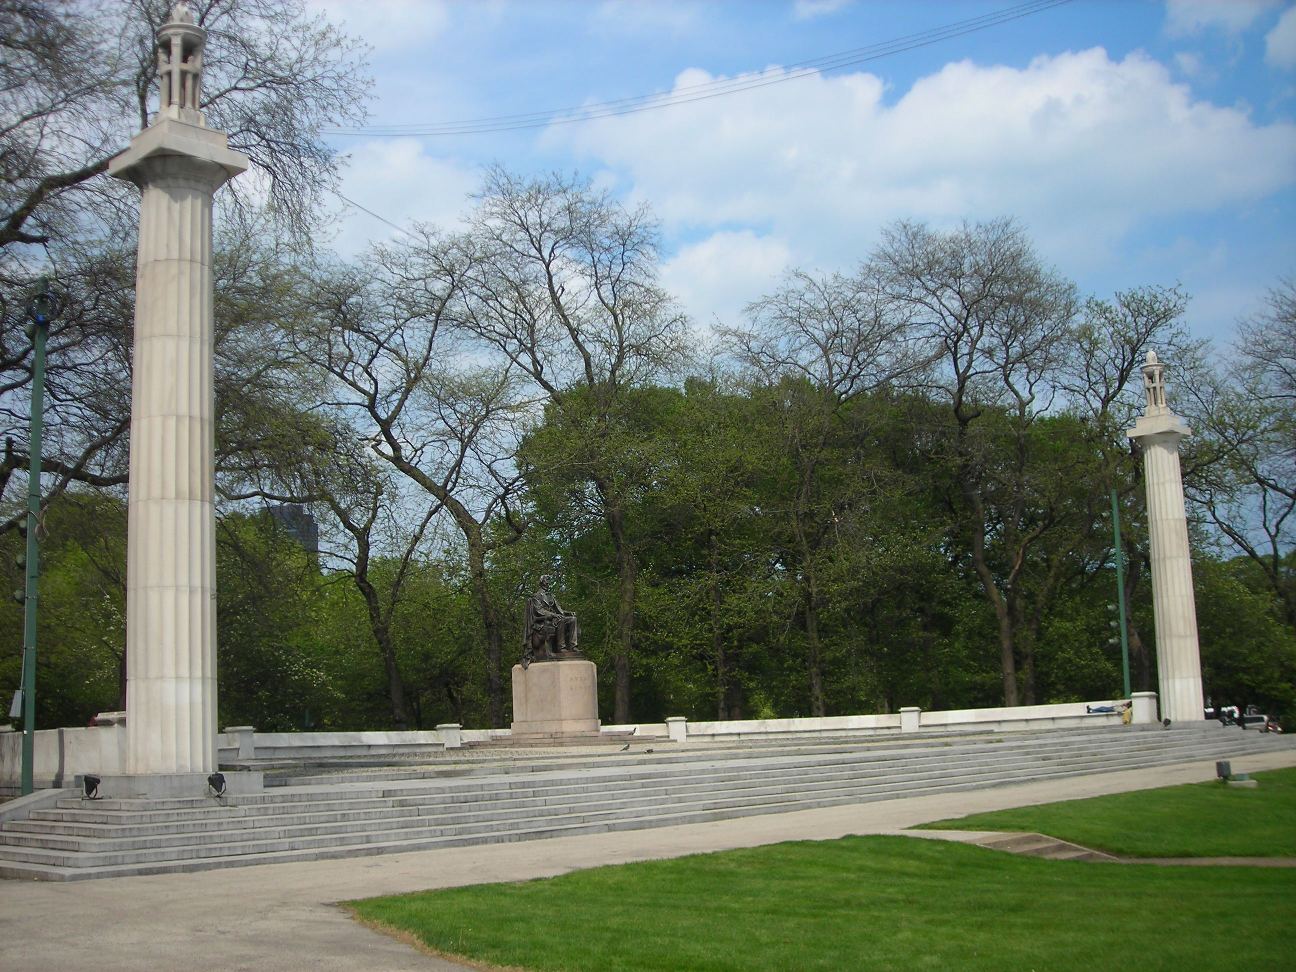 Augustus Saint-Gaudens and Stanford White, <em>Abraham Lincoln, Head of State</em>, cast 1908, installed 1926, bronze, granite, and marble, 35 x 150 x 60 feet (Chicago Park District)